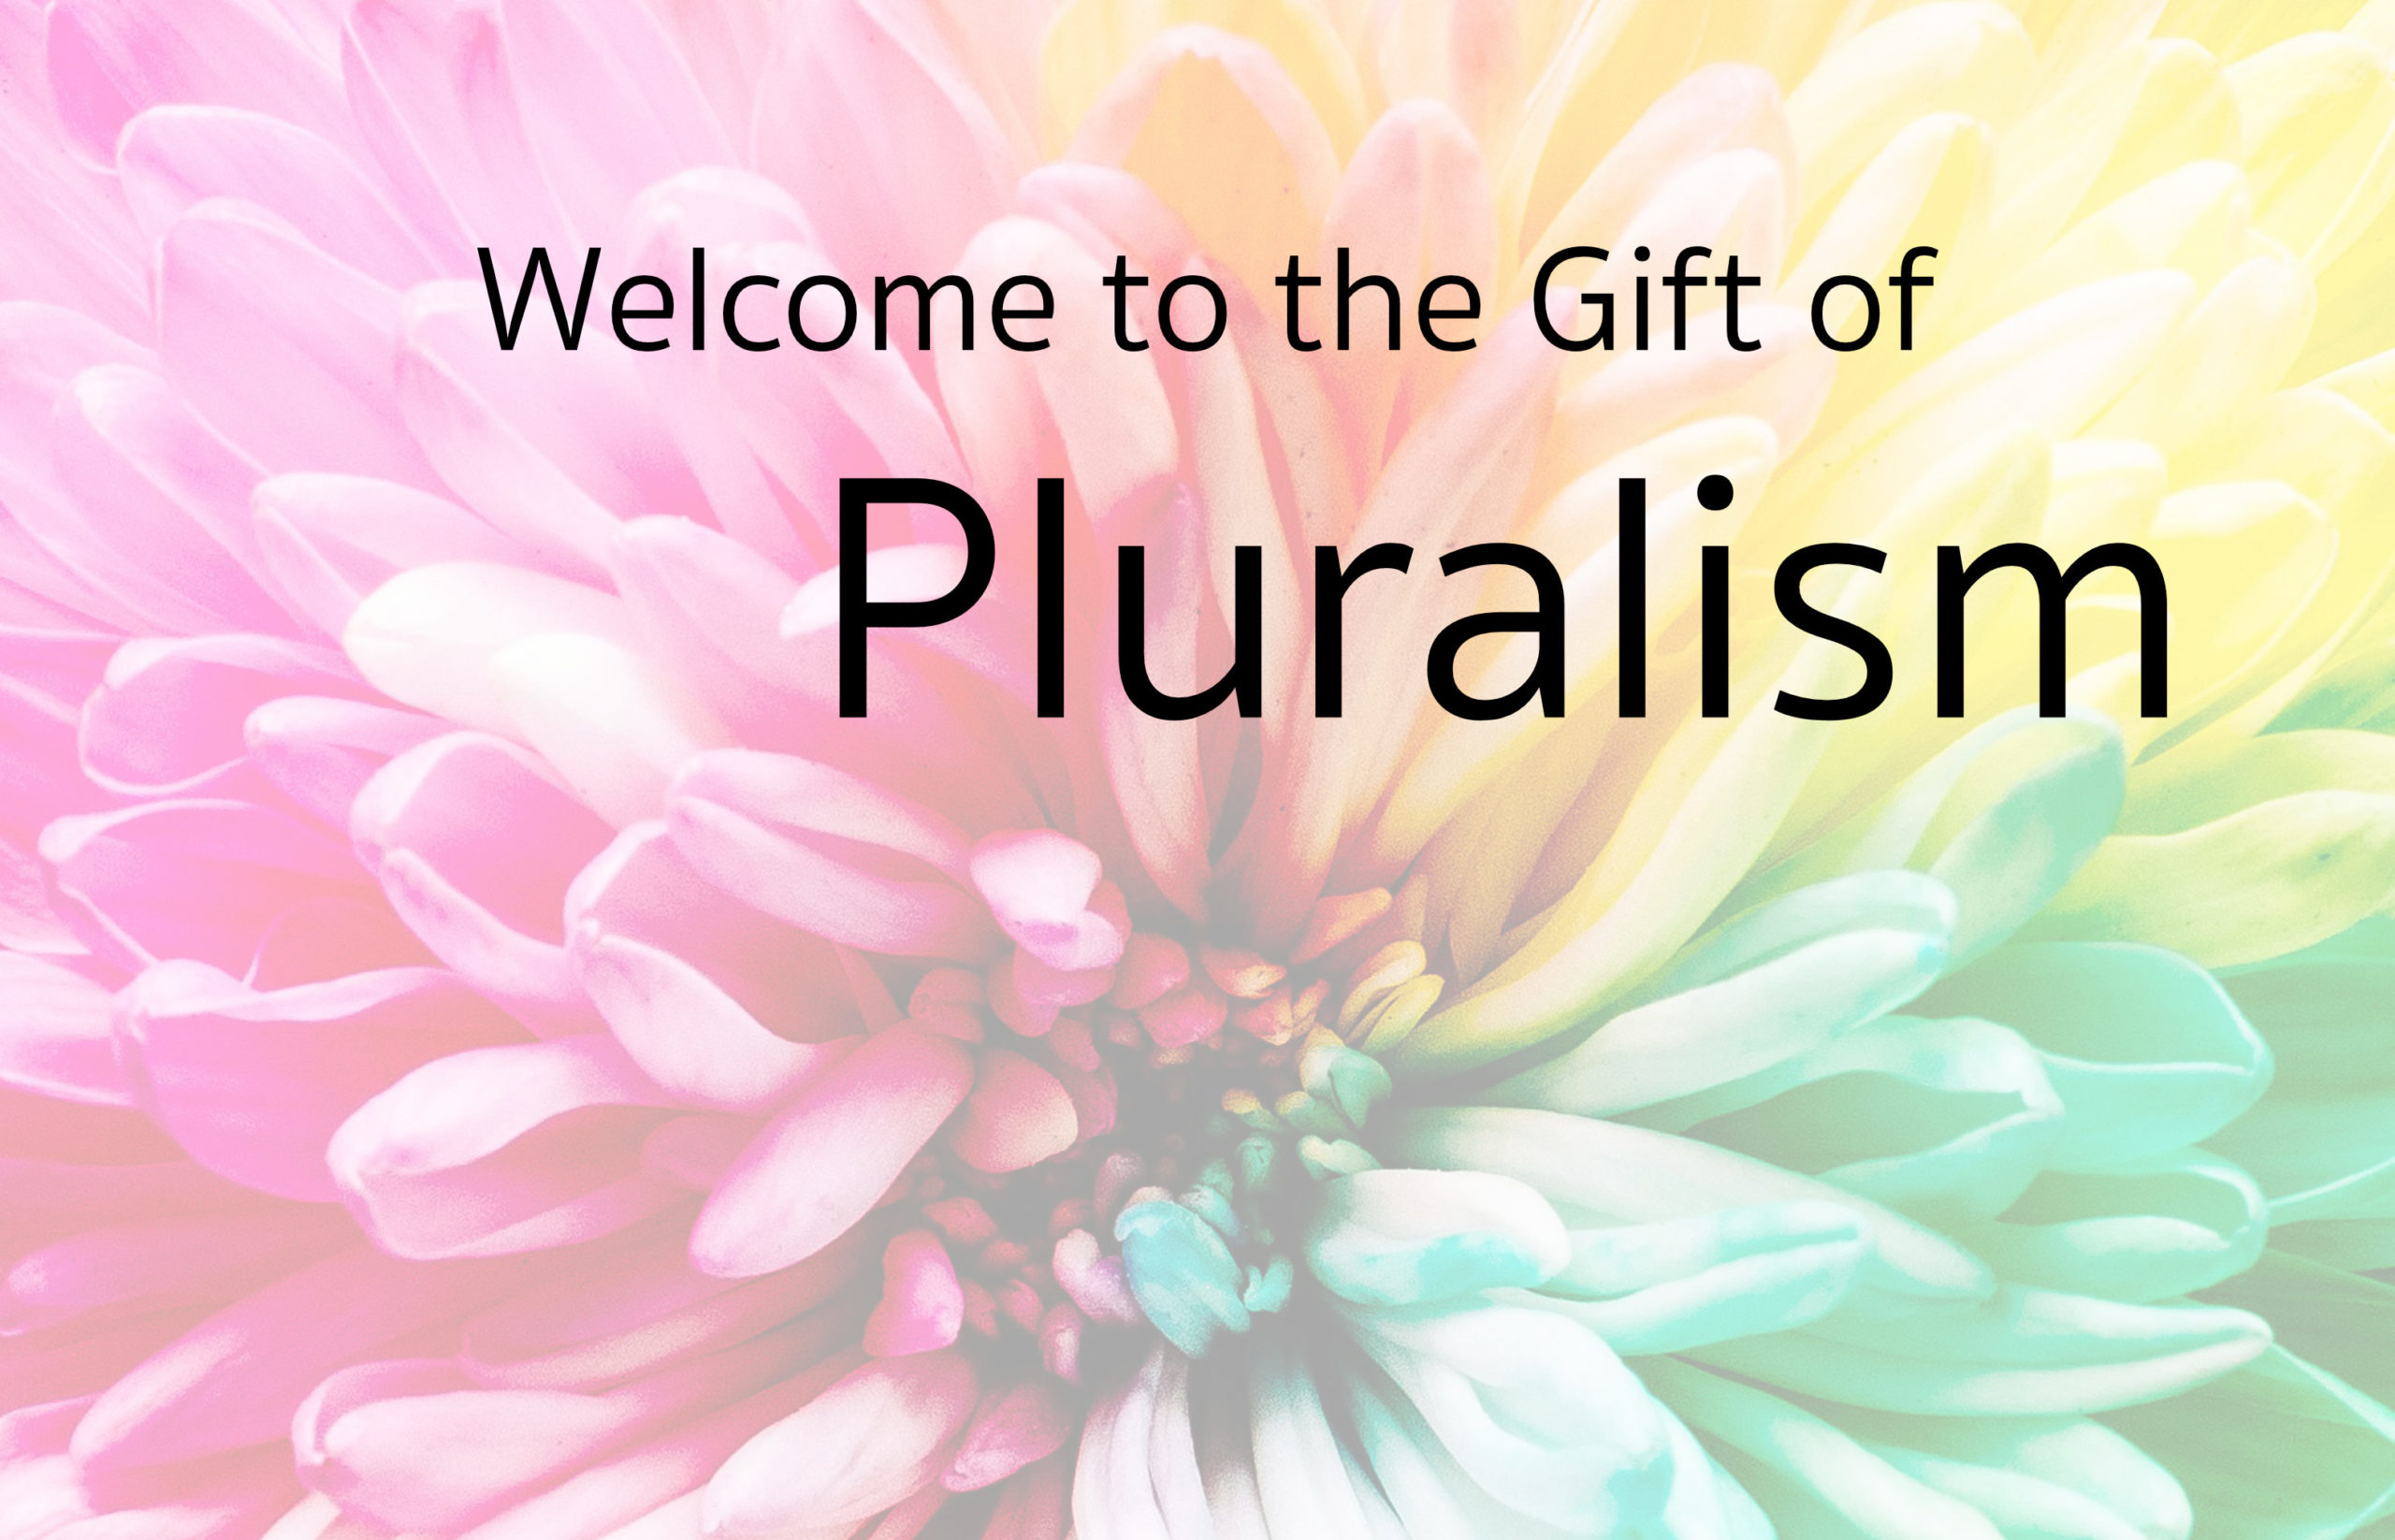 Welcome to the gift of pluralism